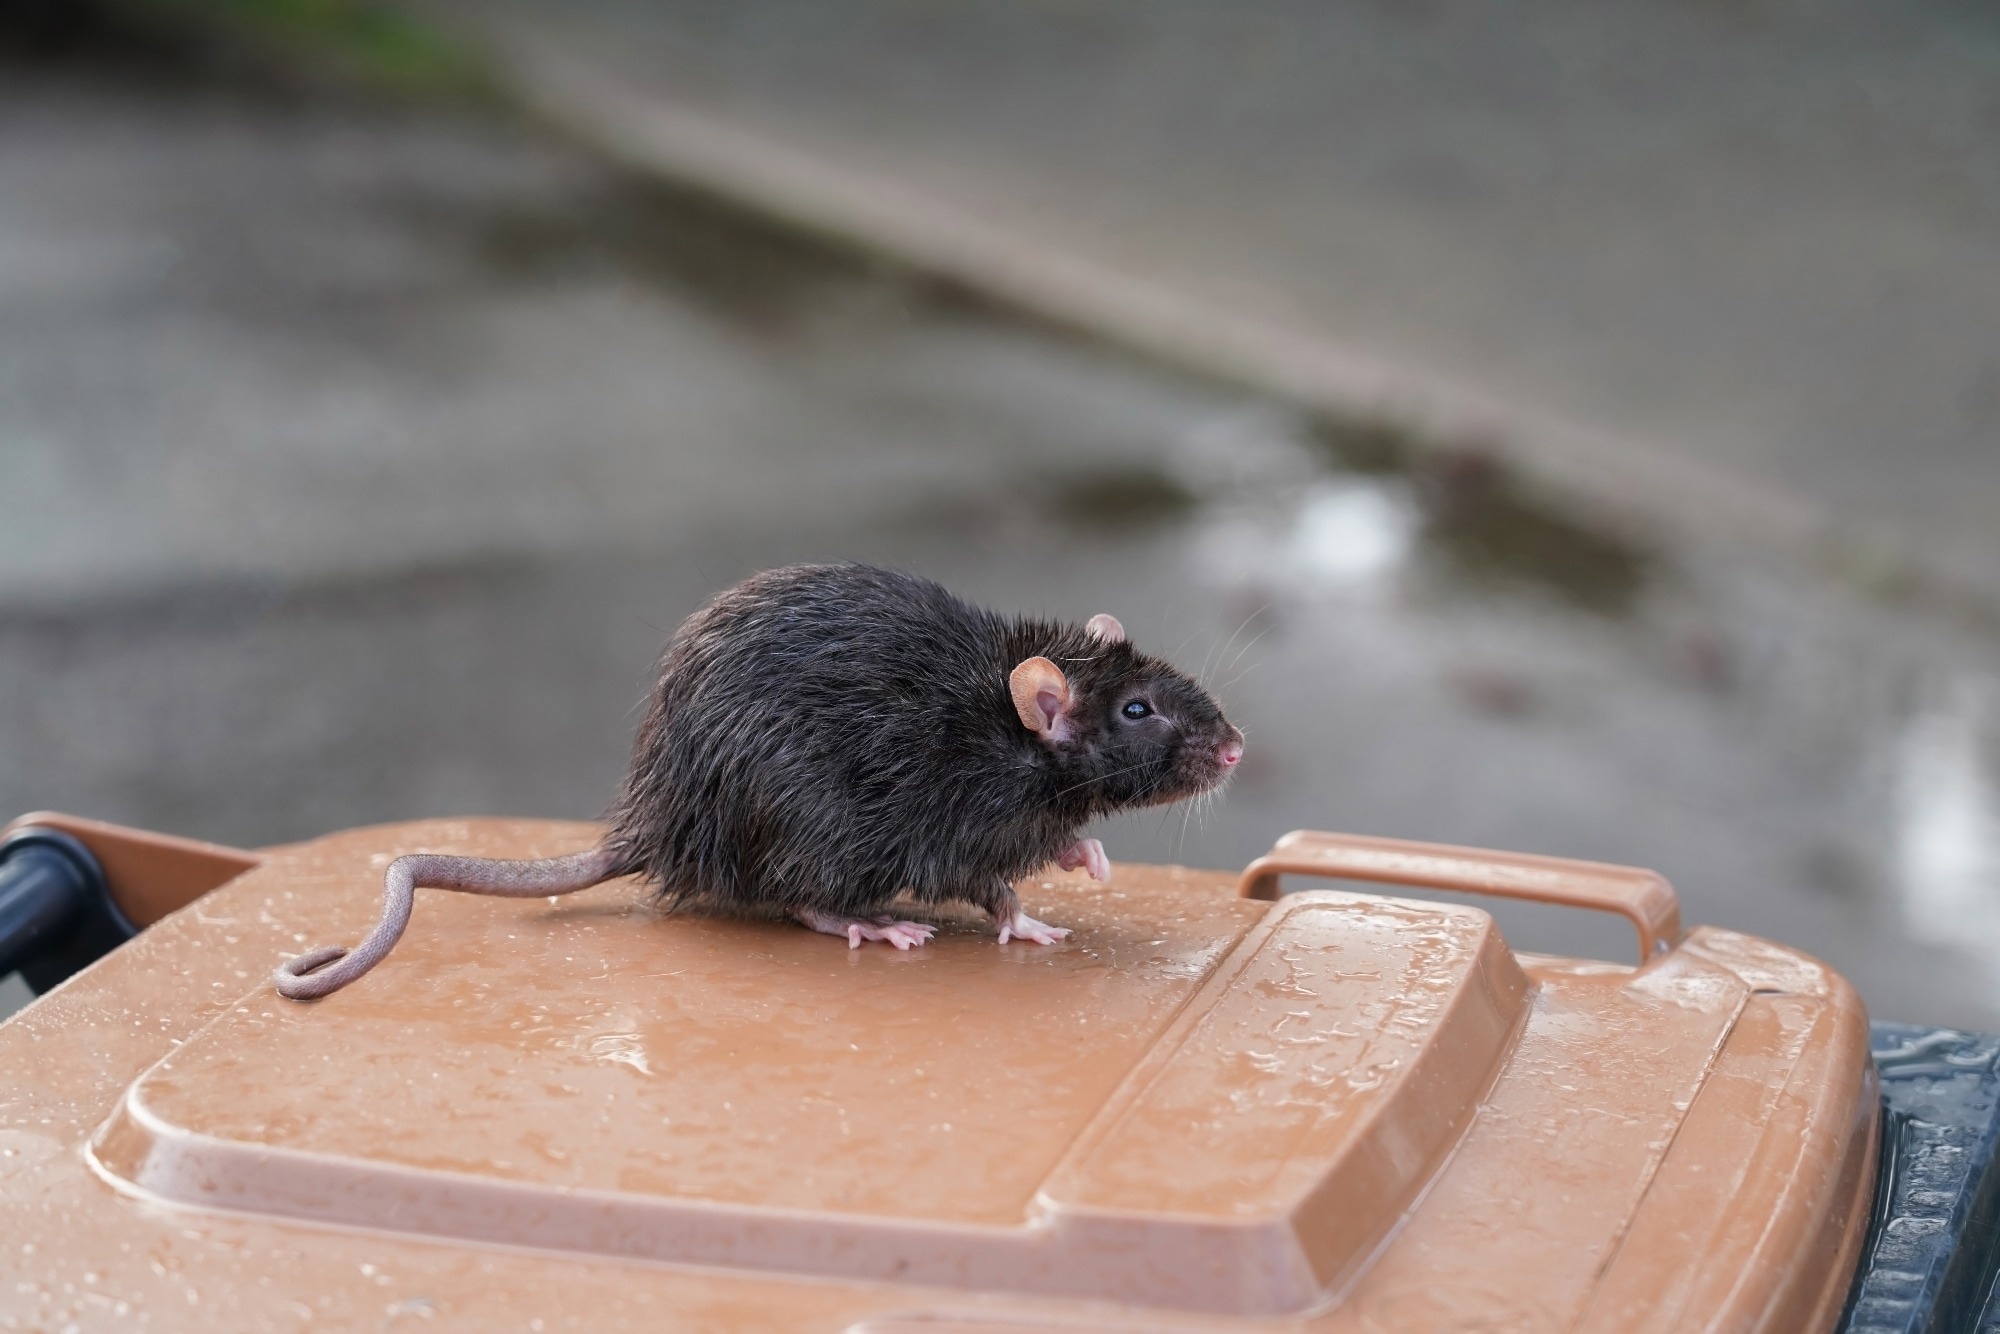 Study: SARS-CoV-2 Exposure in Norway Rats (Rattus norvegicus) from New York City. Image Credit: Holger Kirk / Shutterstock